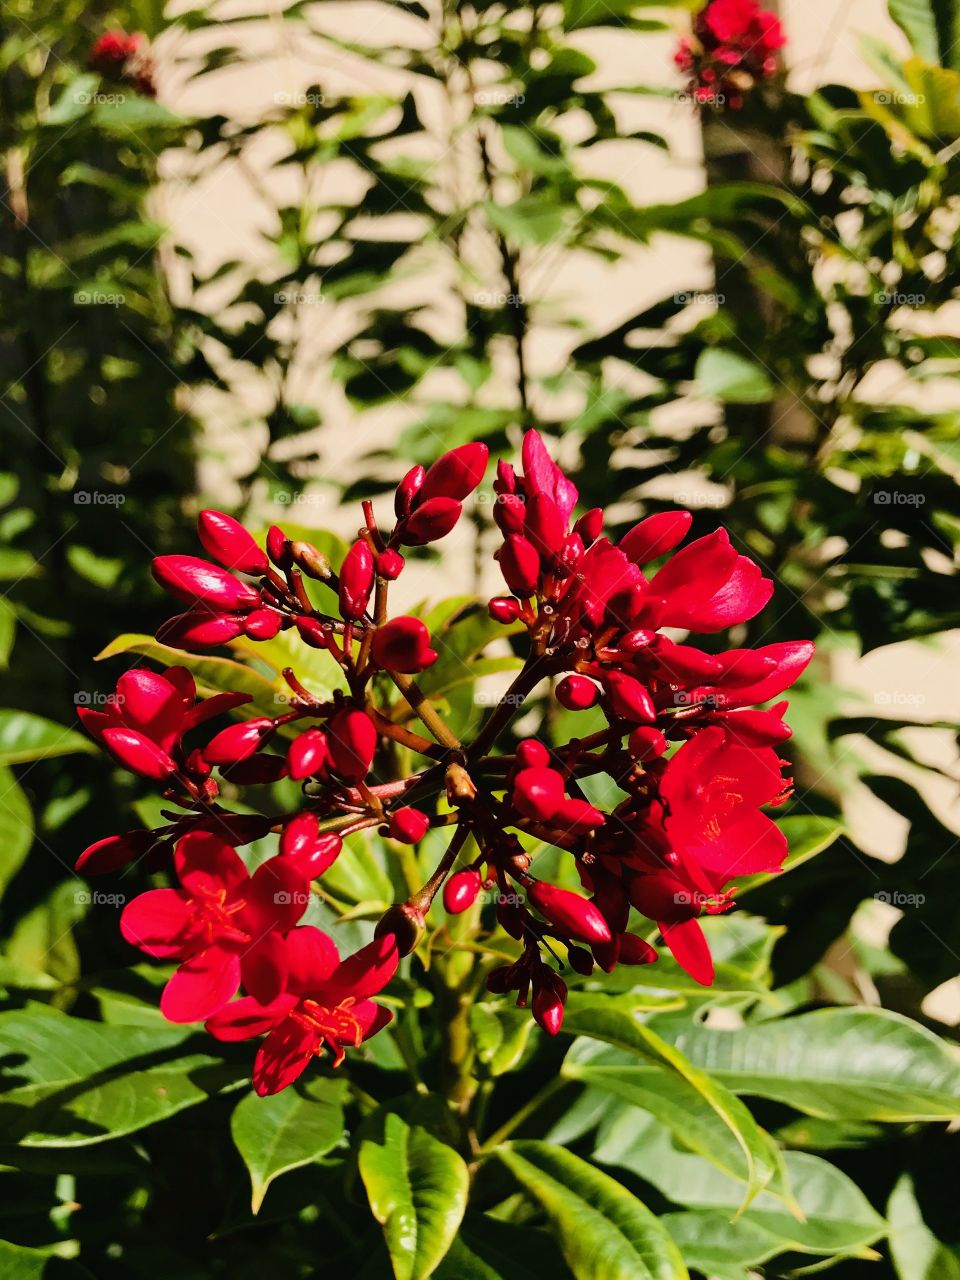 Red flowers 